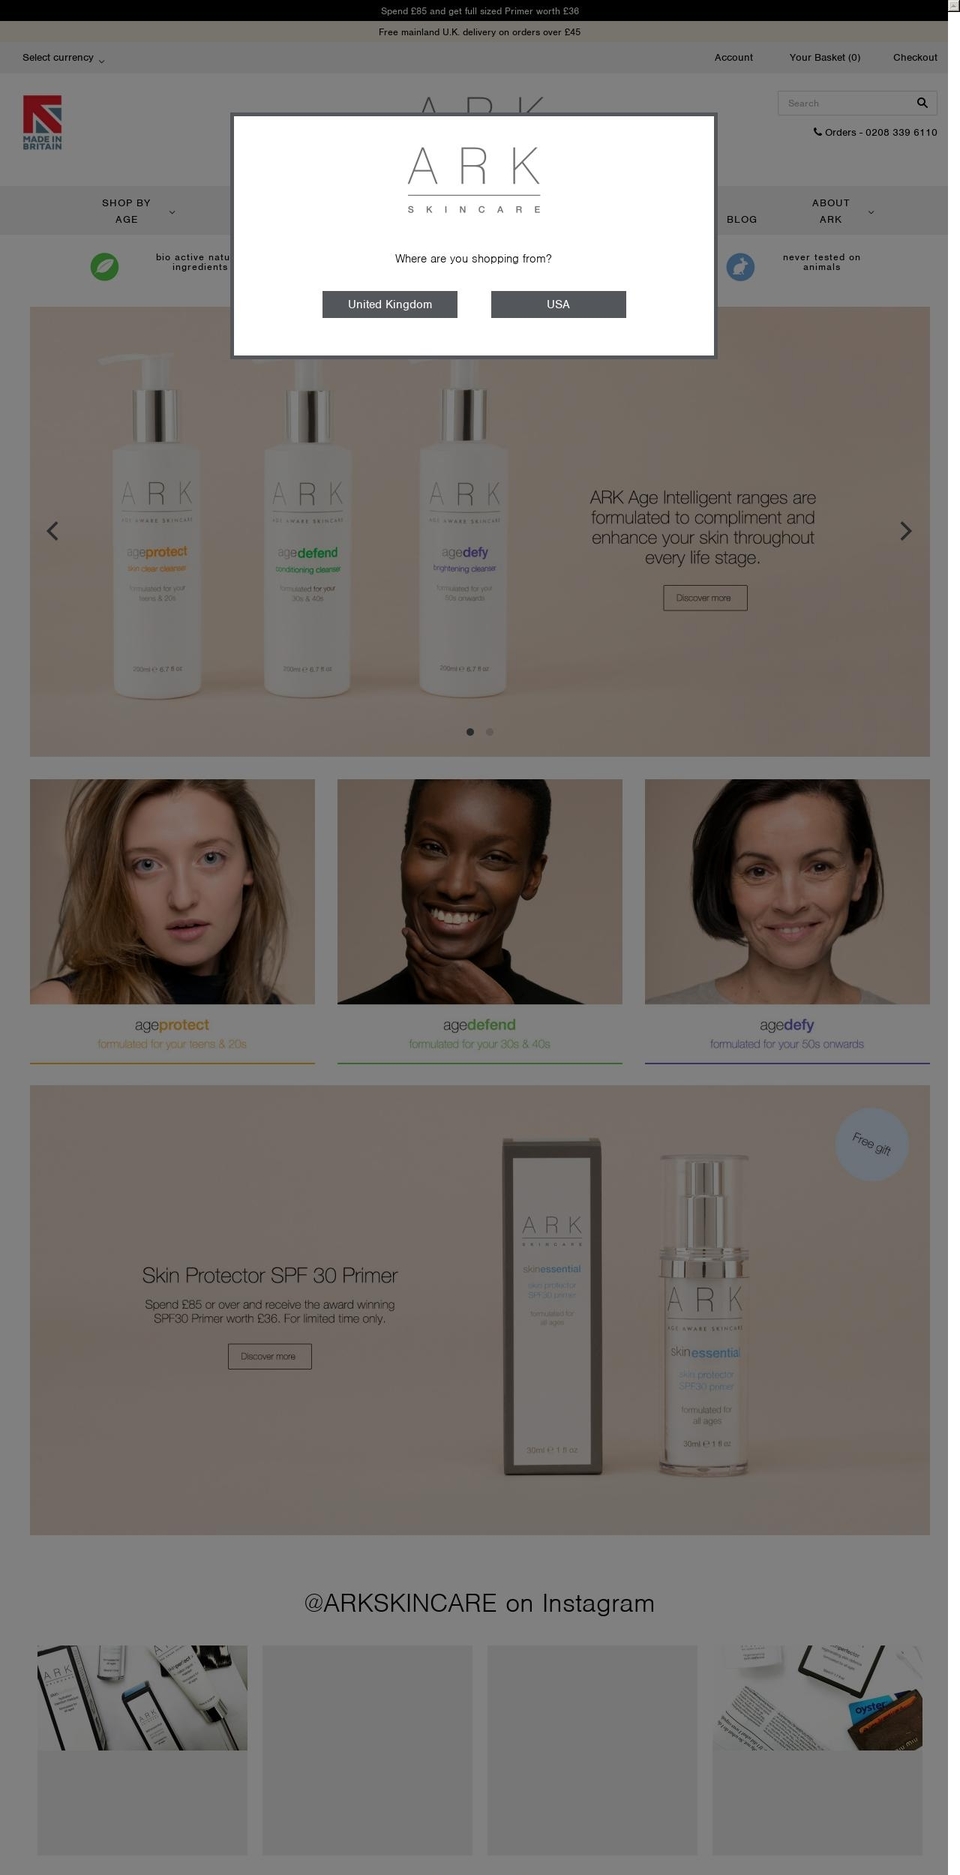 Live Shopify theme site example arkskincare.info